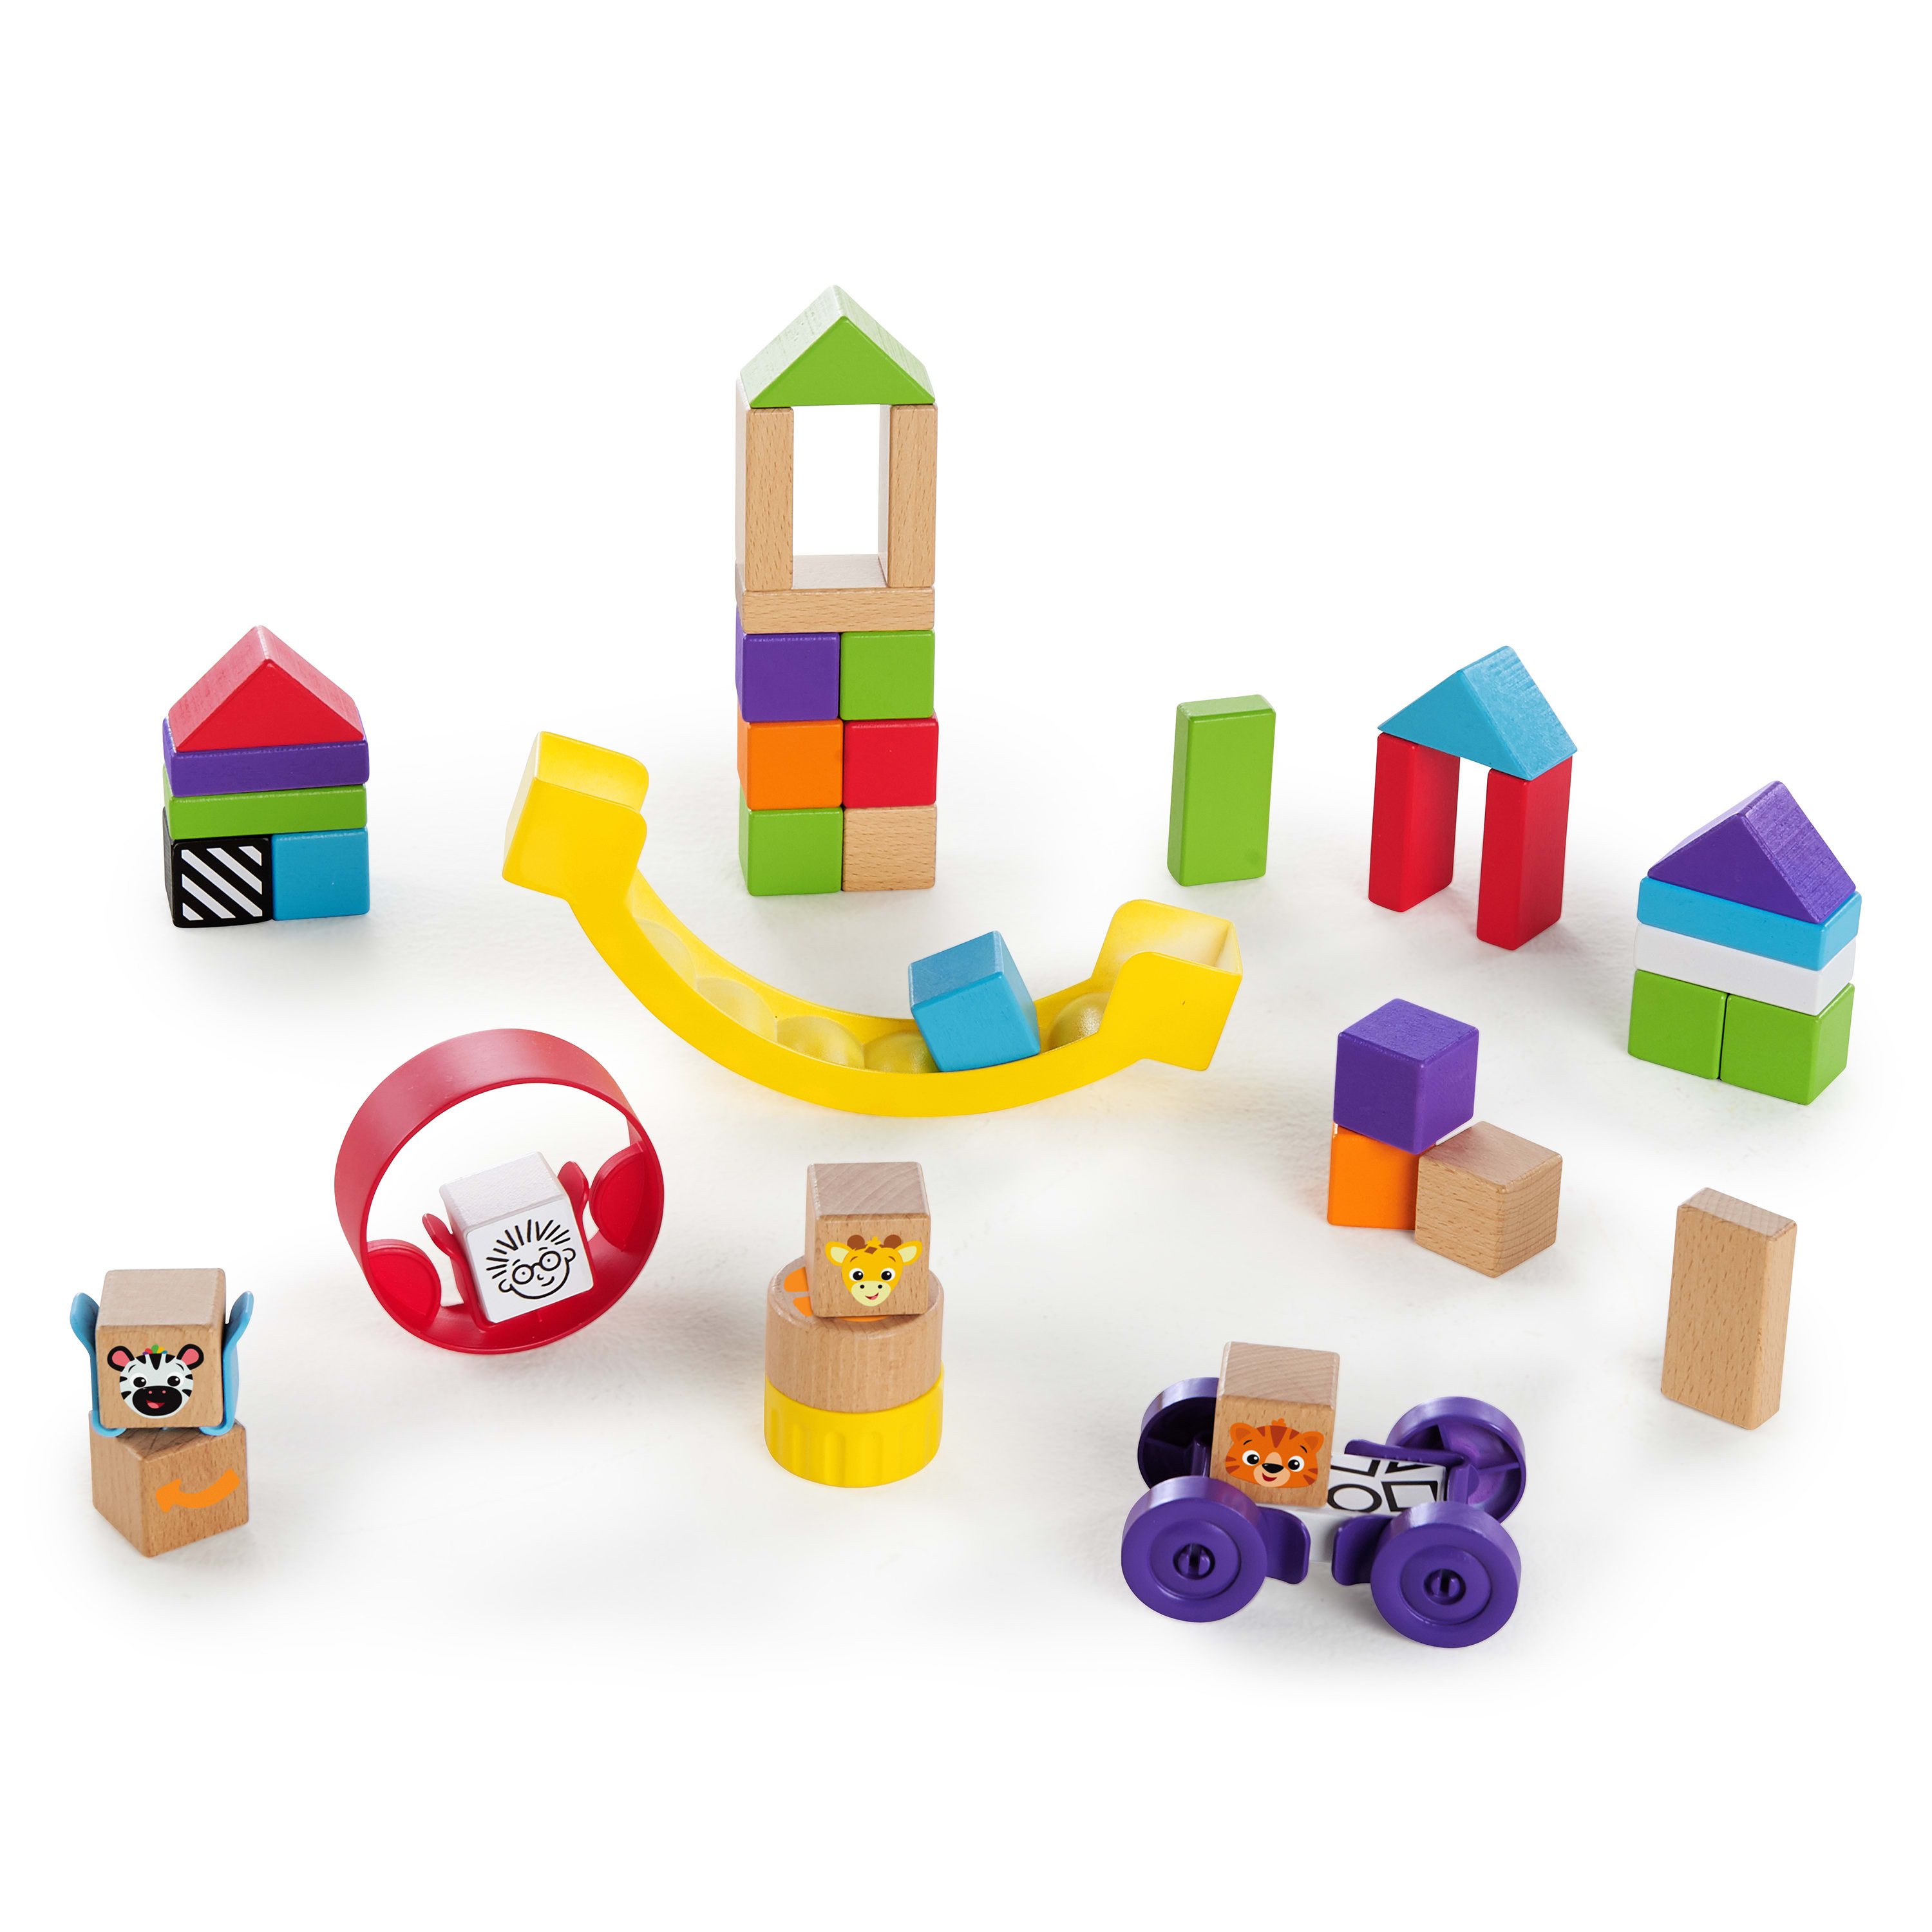 Baby Einstein Curious Creator Kit Wooden Blocks Discovery 40 Piece Toy Set, Ages 12 months + - image 5 of 17